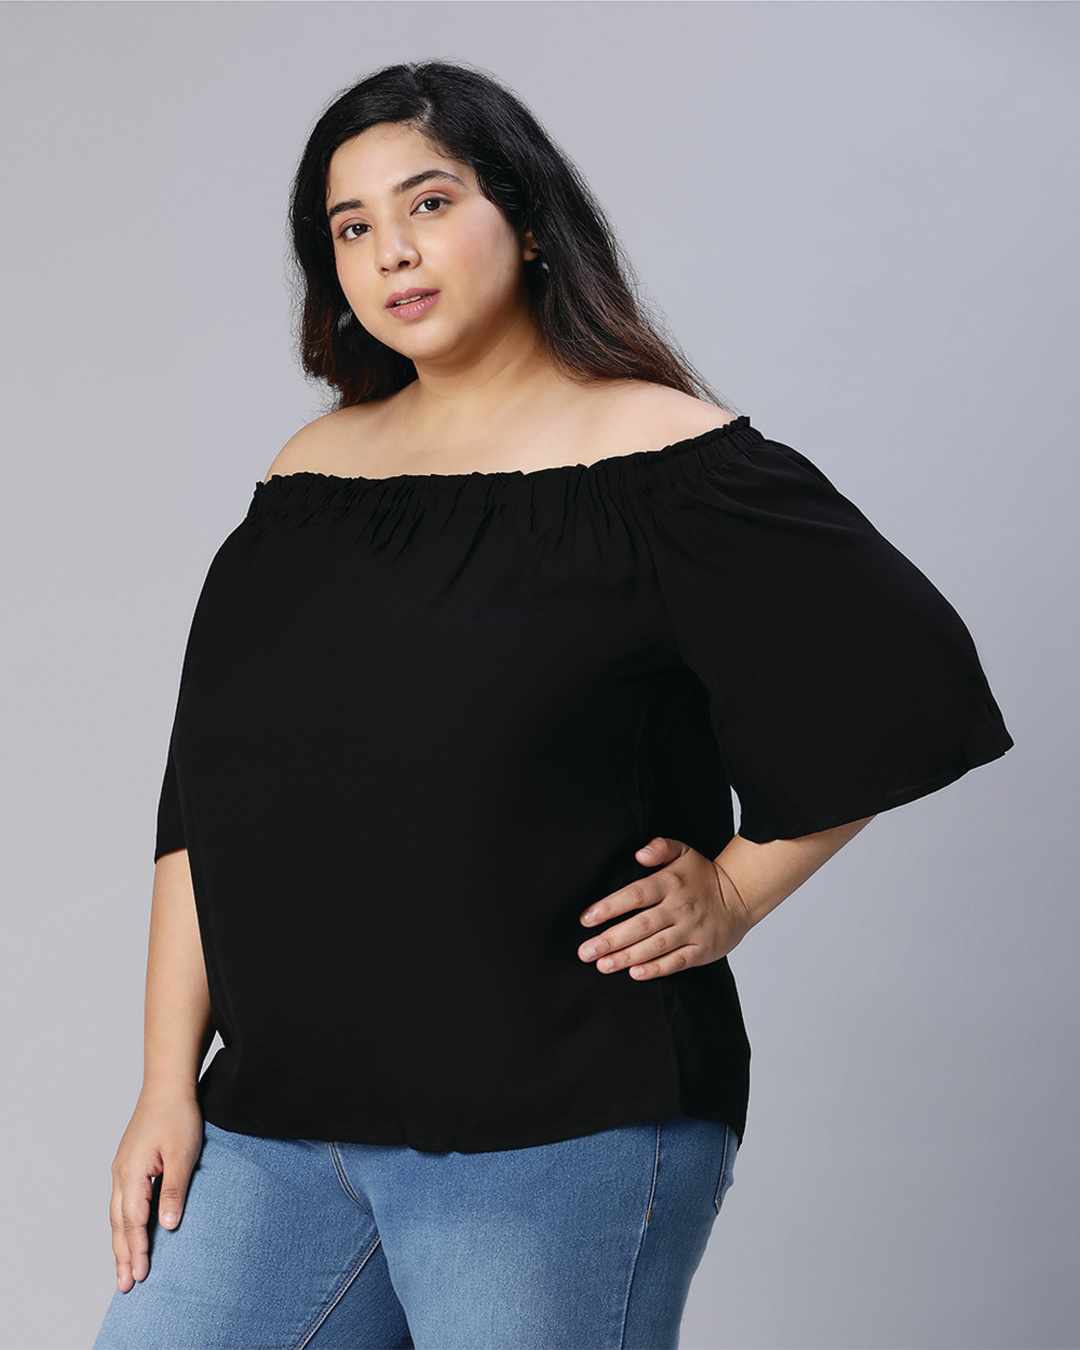 Shop Women's Black Relaxed Fit Plus Size Top-Back